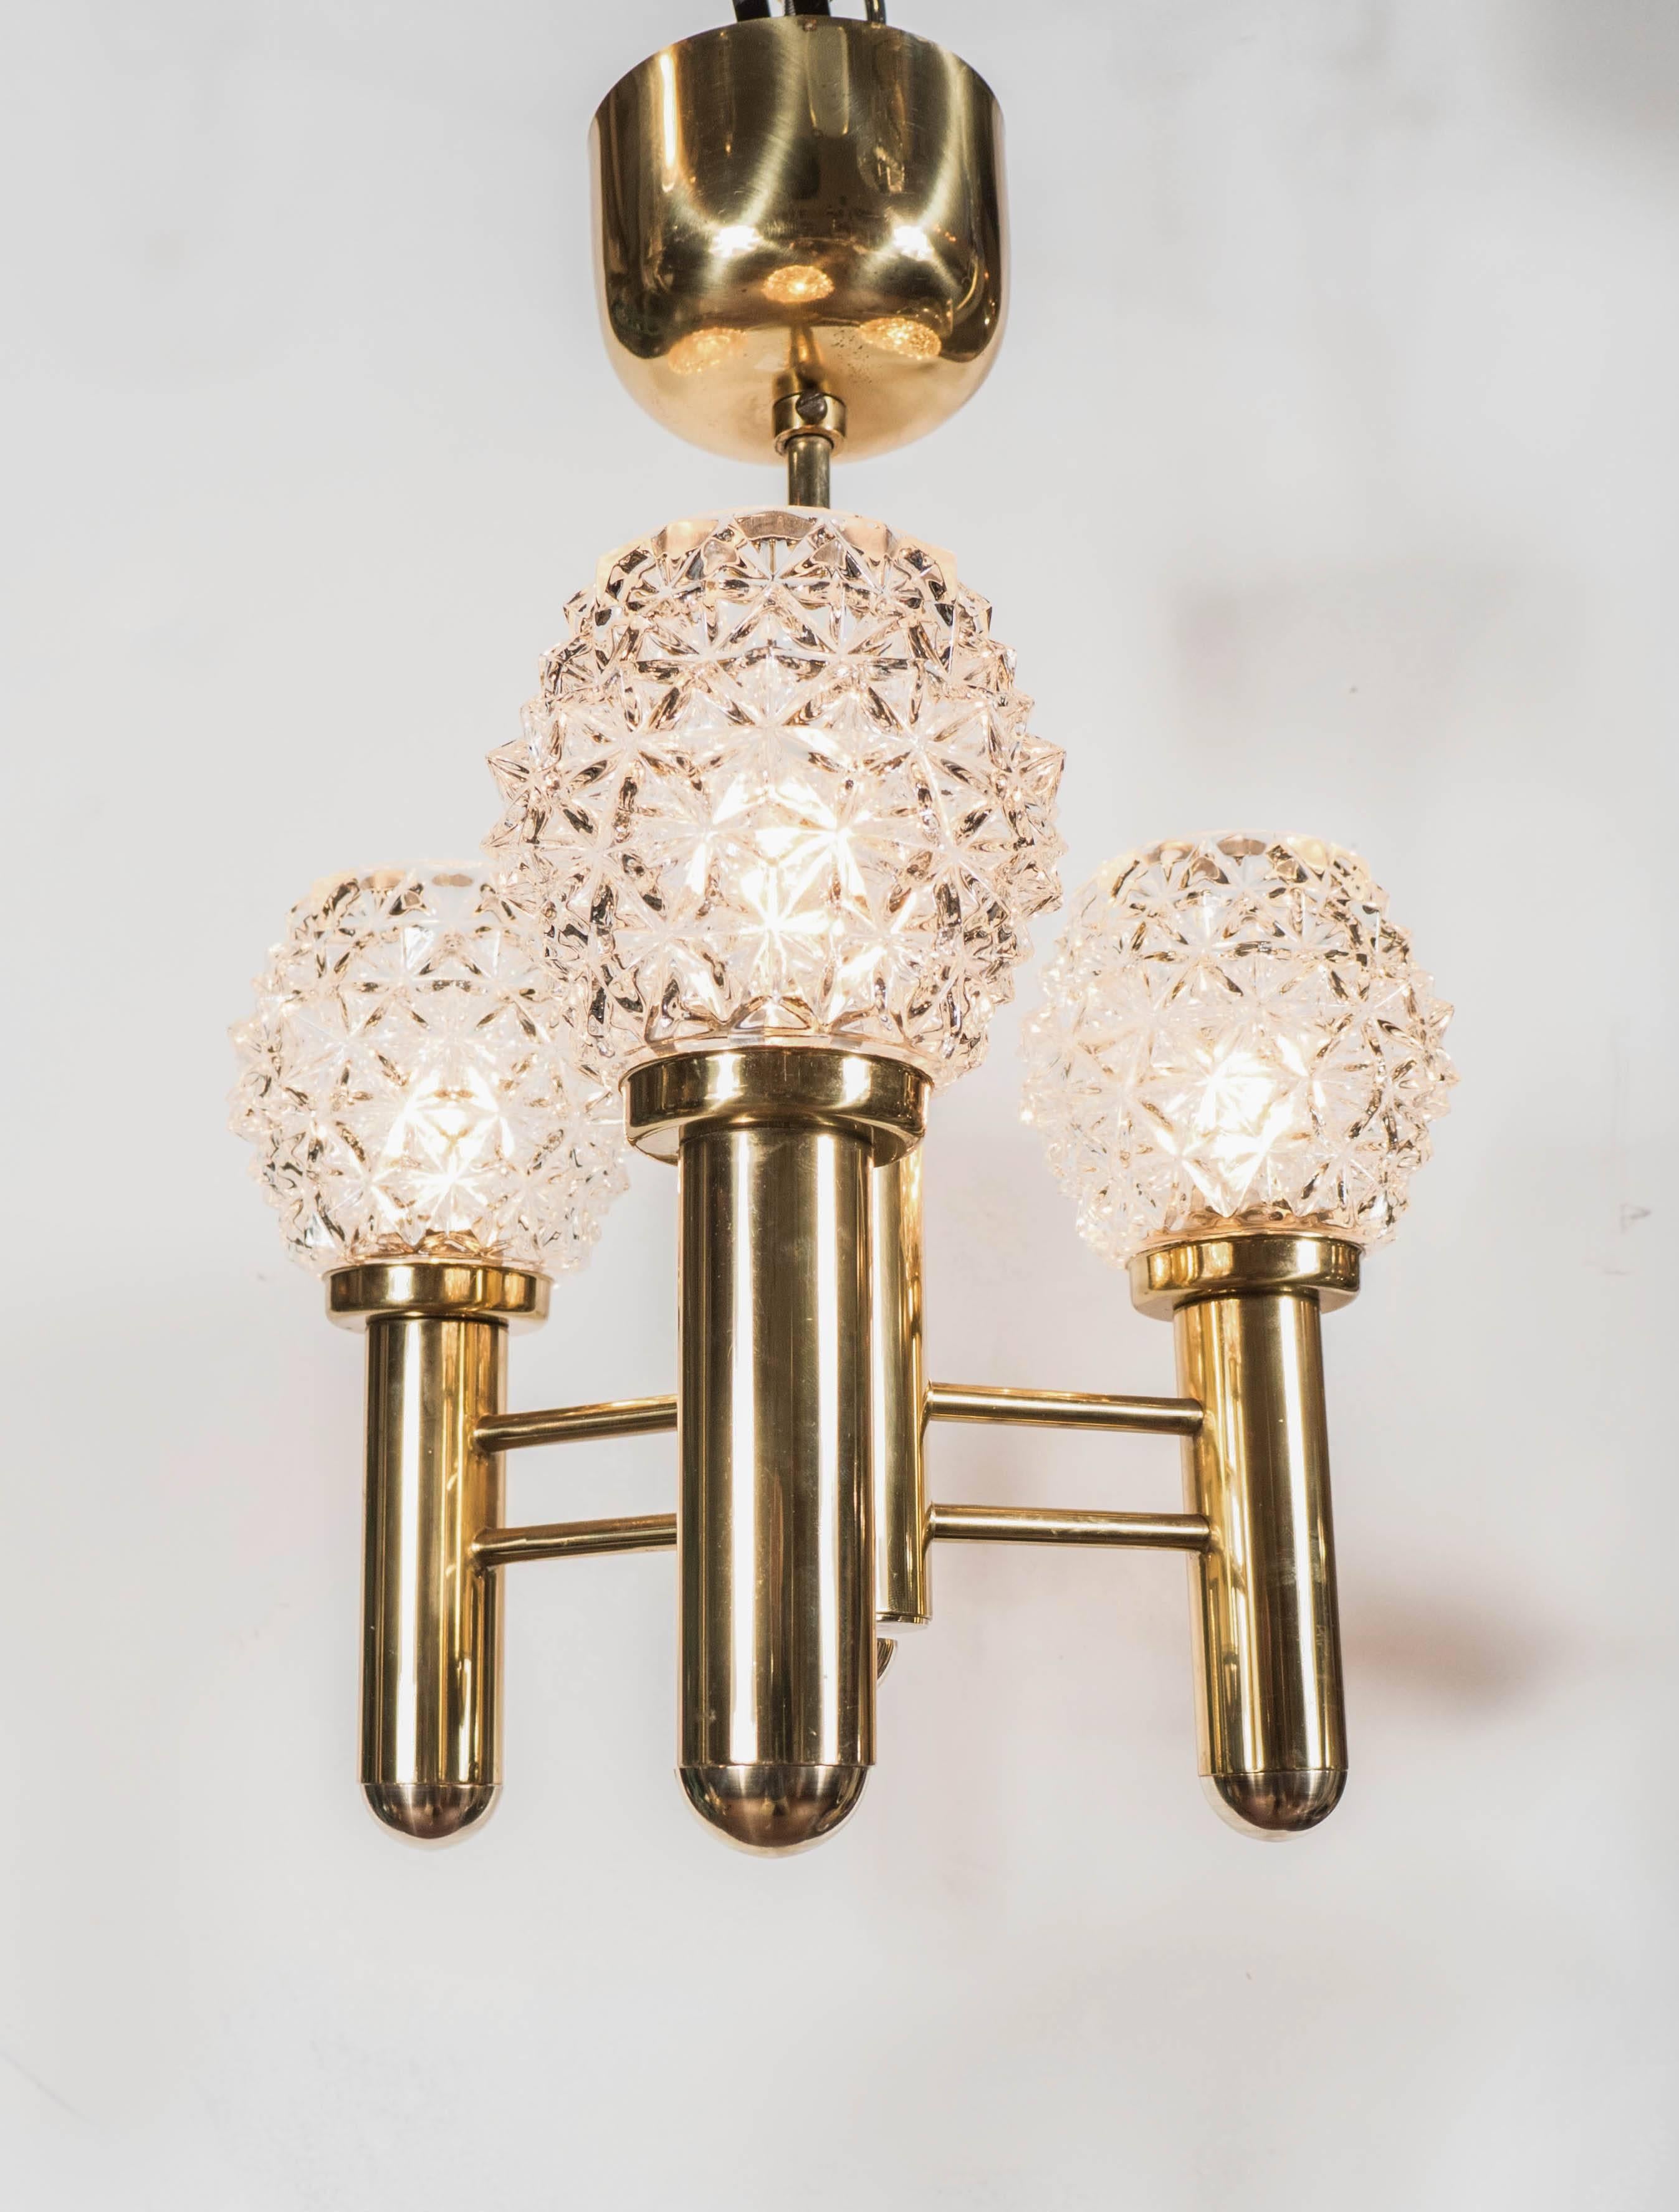 Mid-20th Century Sophisticated Three-Arm Chandelier in Brass with Crystal Shades by Richard Essig